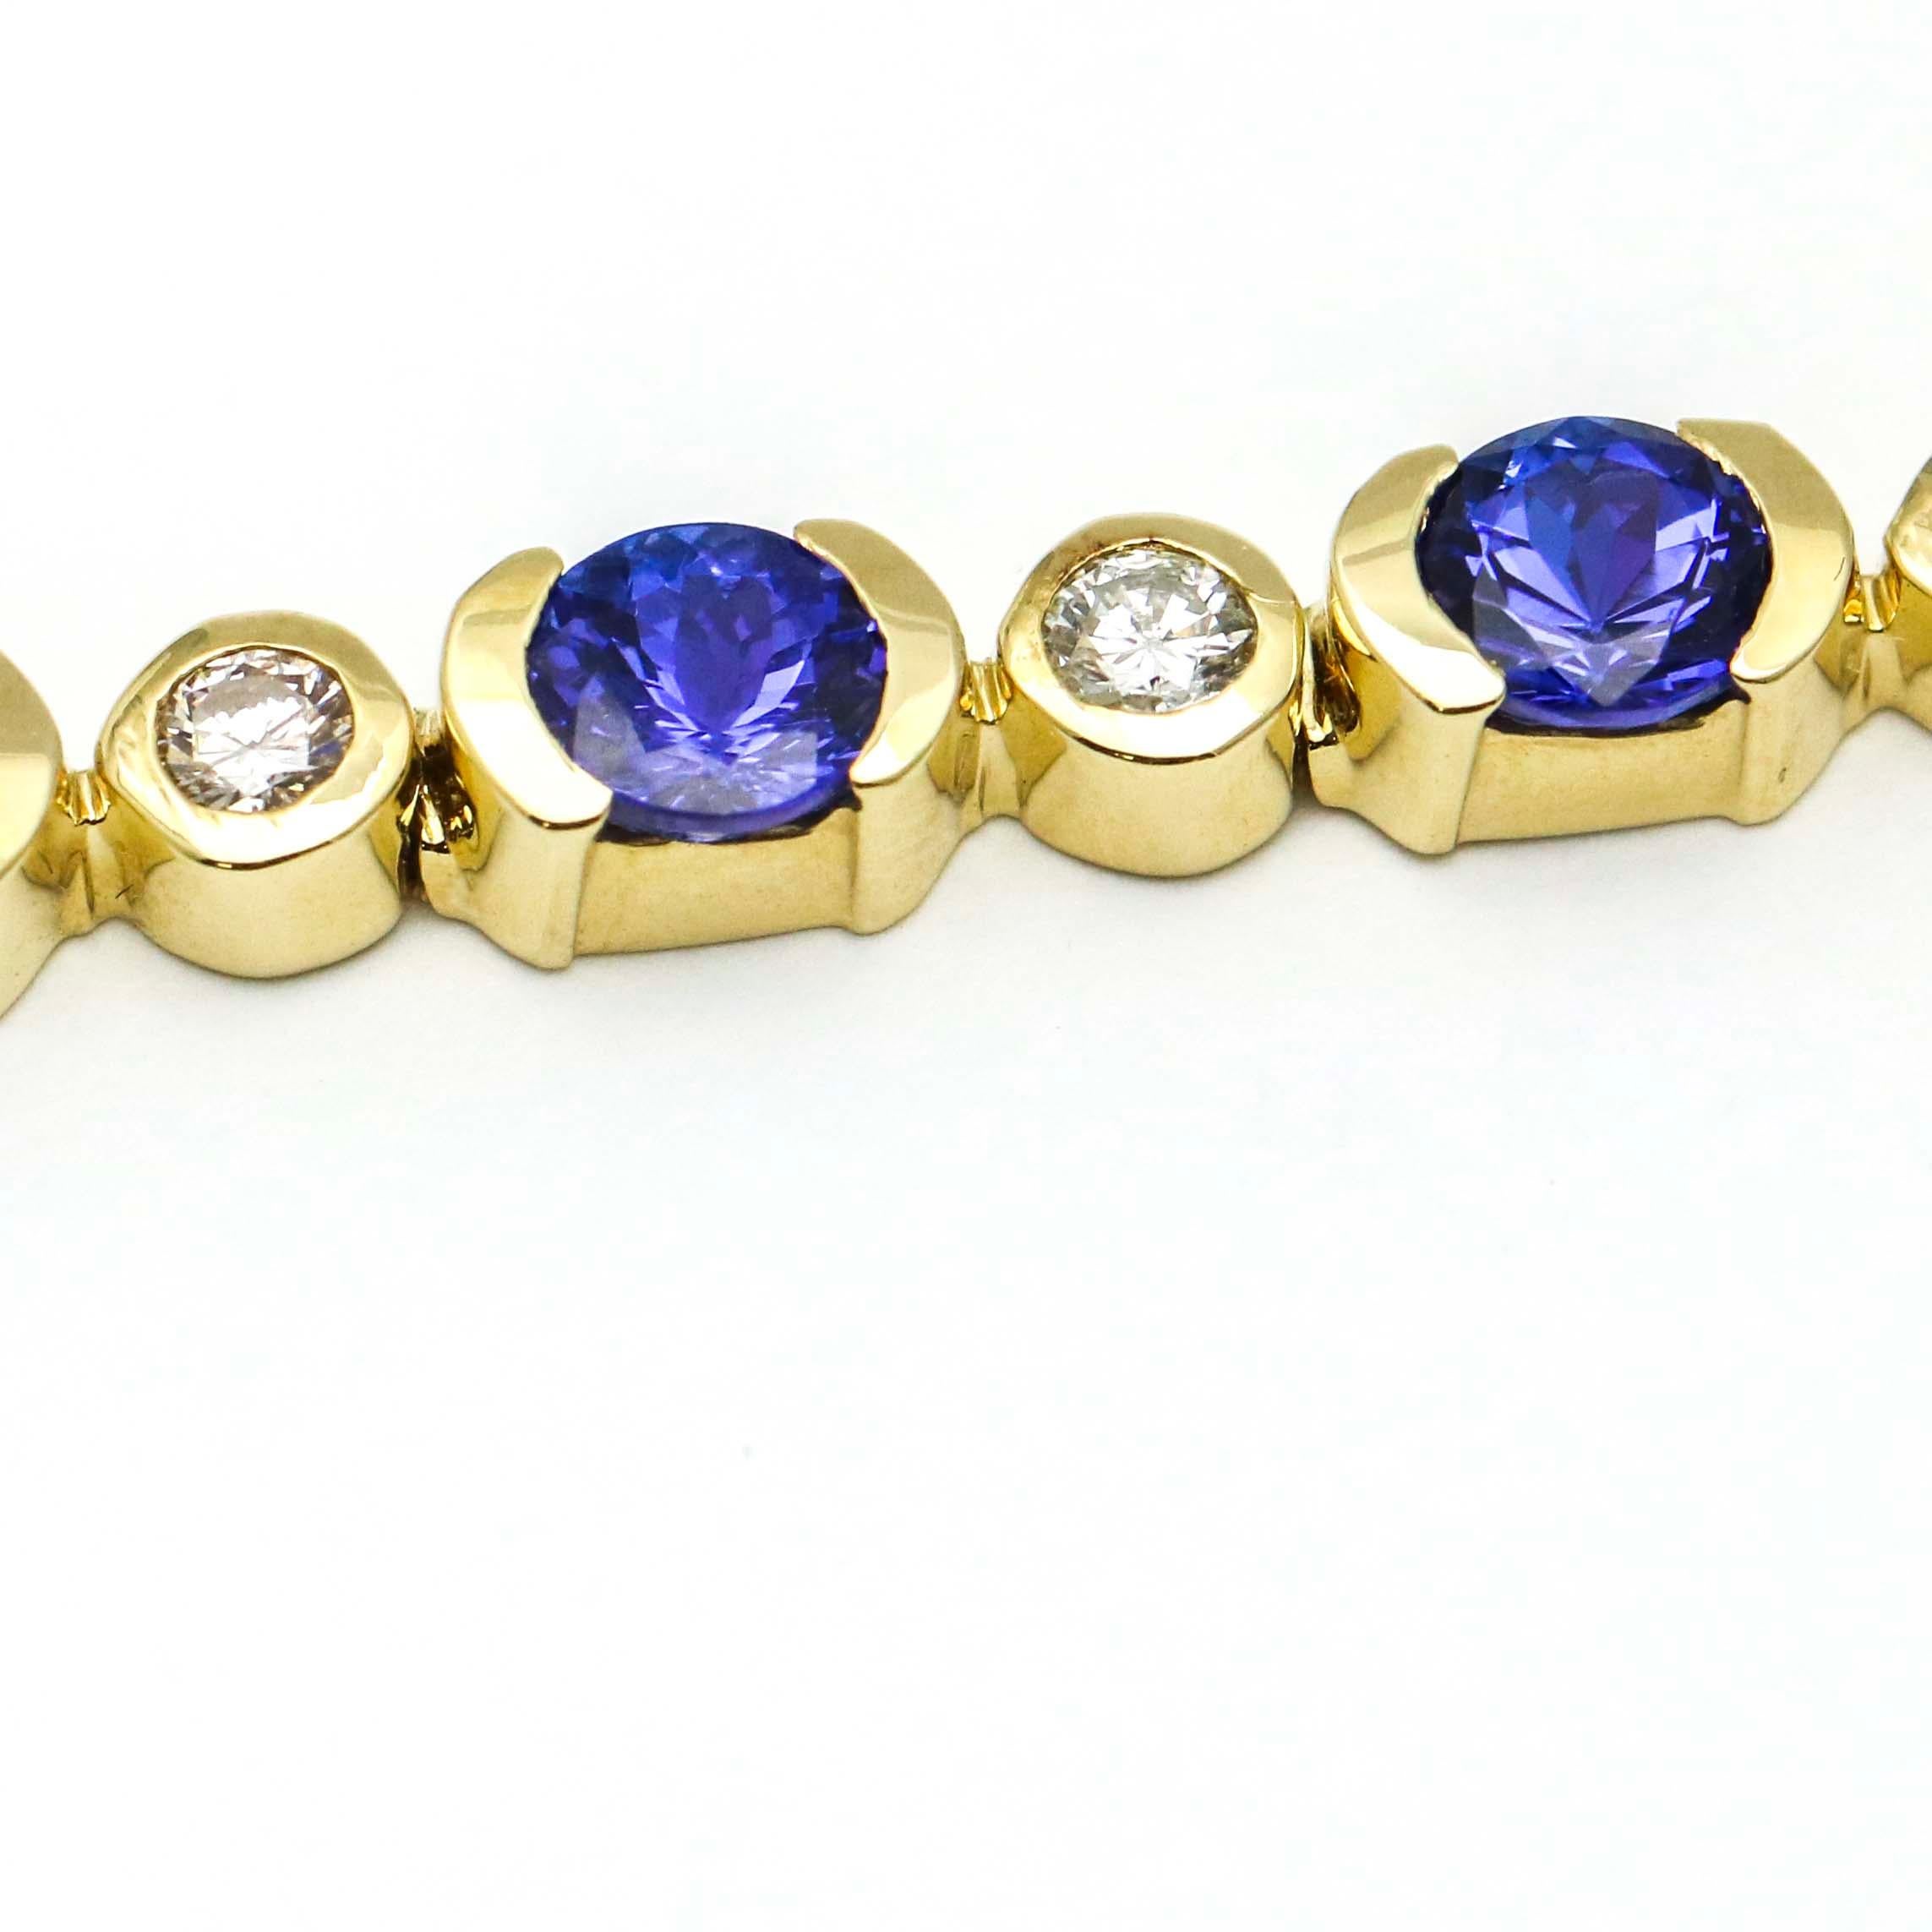 4.70 Carat Tanzanite and Diamond 14 Karat Yellow Gold Tennis Bracelet In Excellent Condition For Sale In Fort Lauderdale, FL